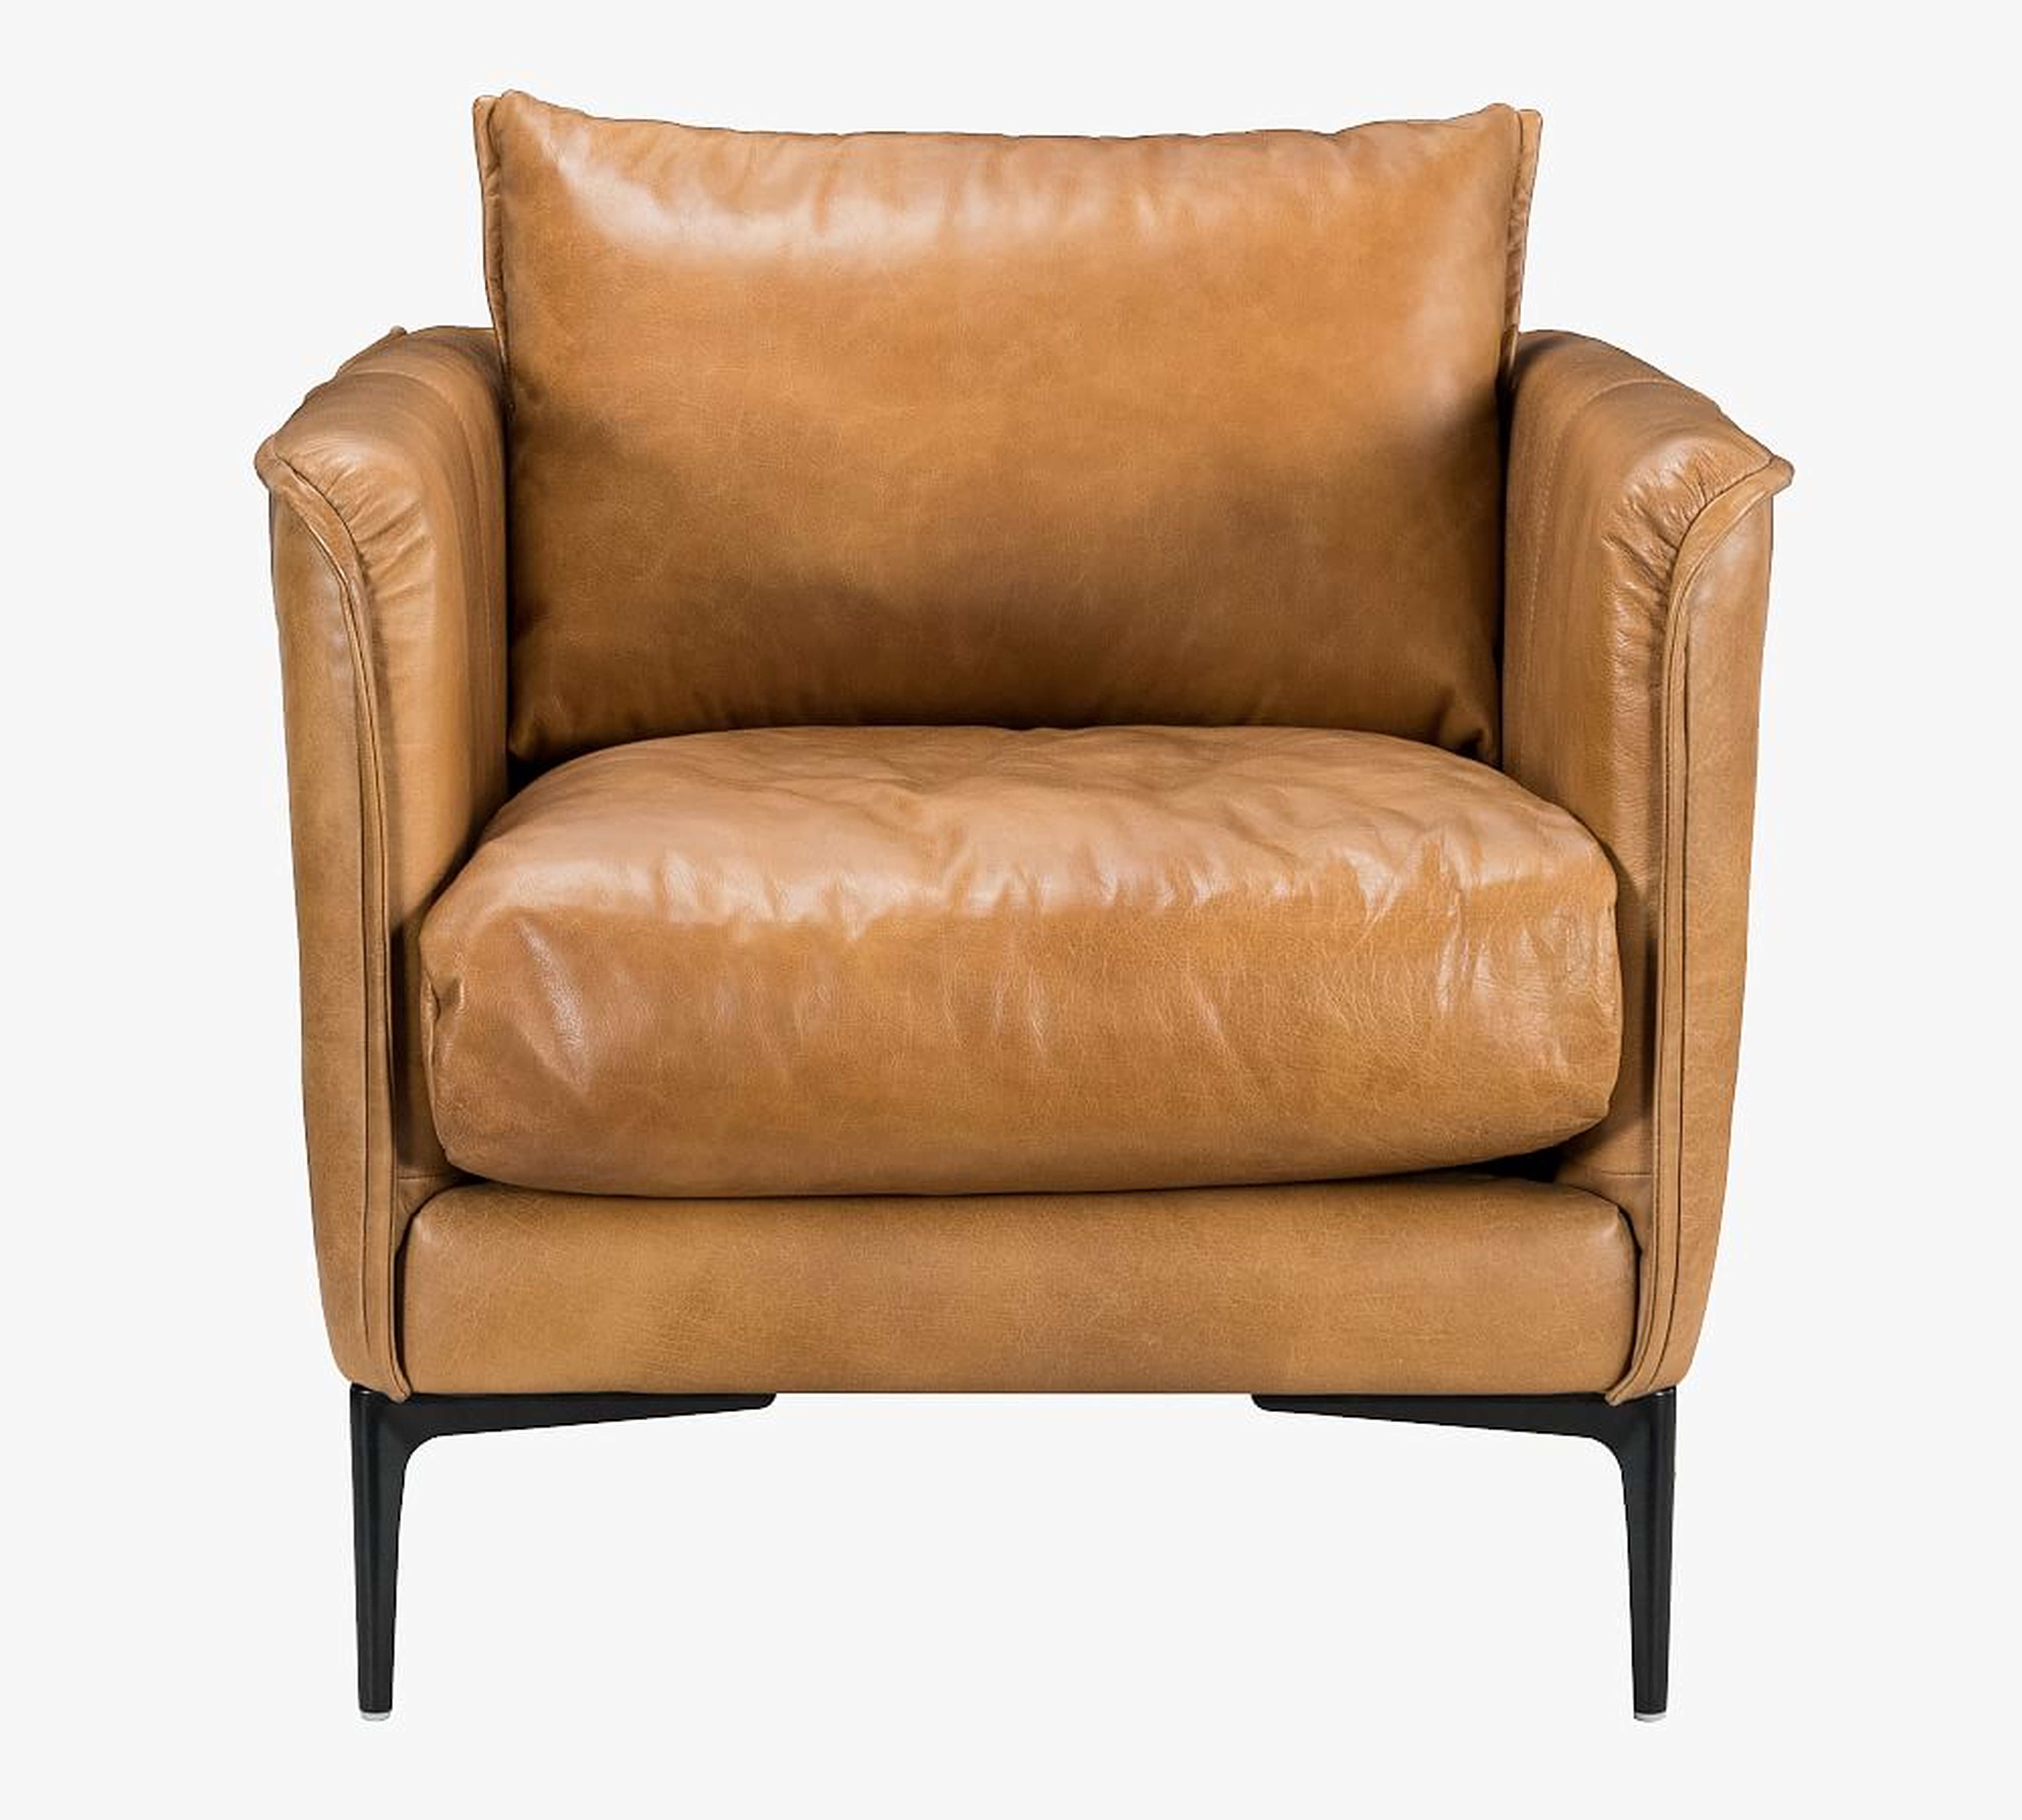 Waldorf Leather Armchair, Apricot - Pottery Barn